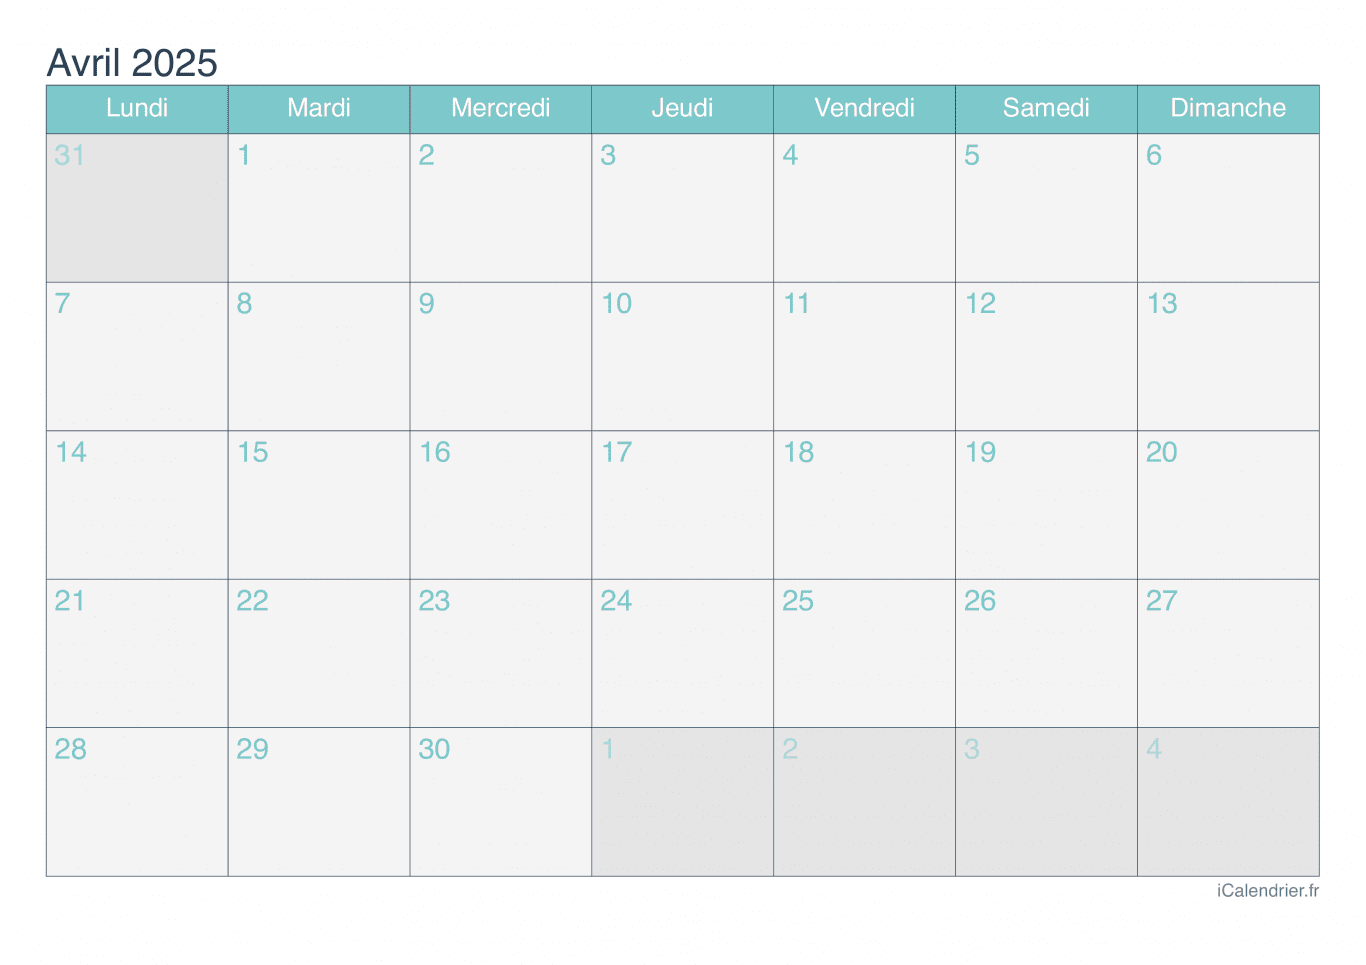 Calendrier d'avril 2025 - Turquoise